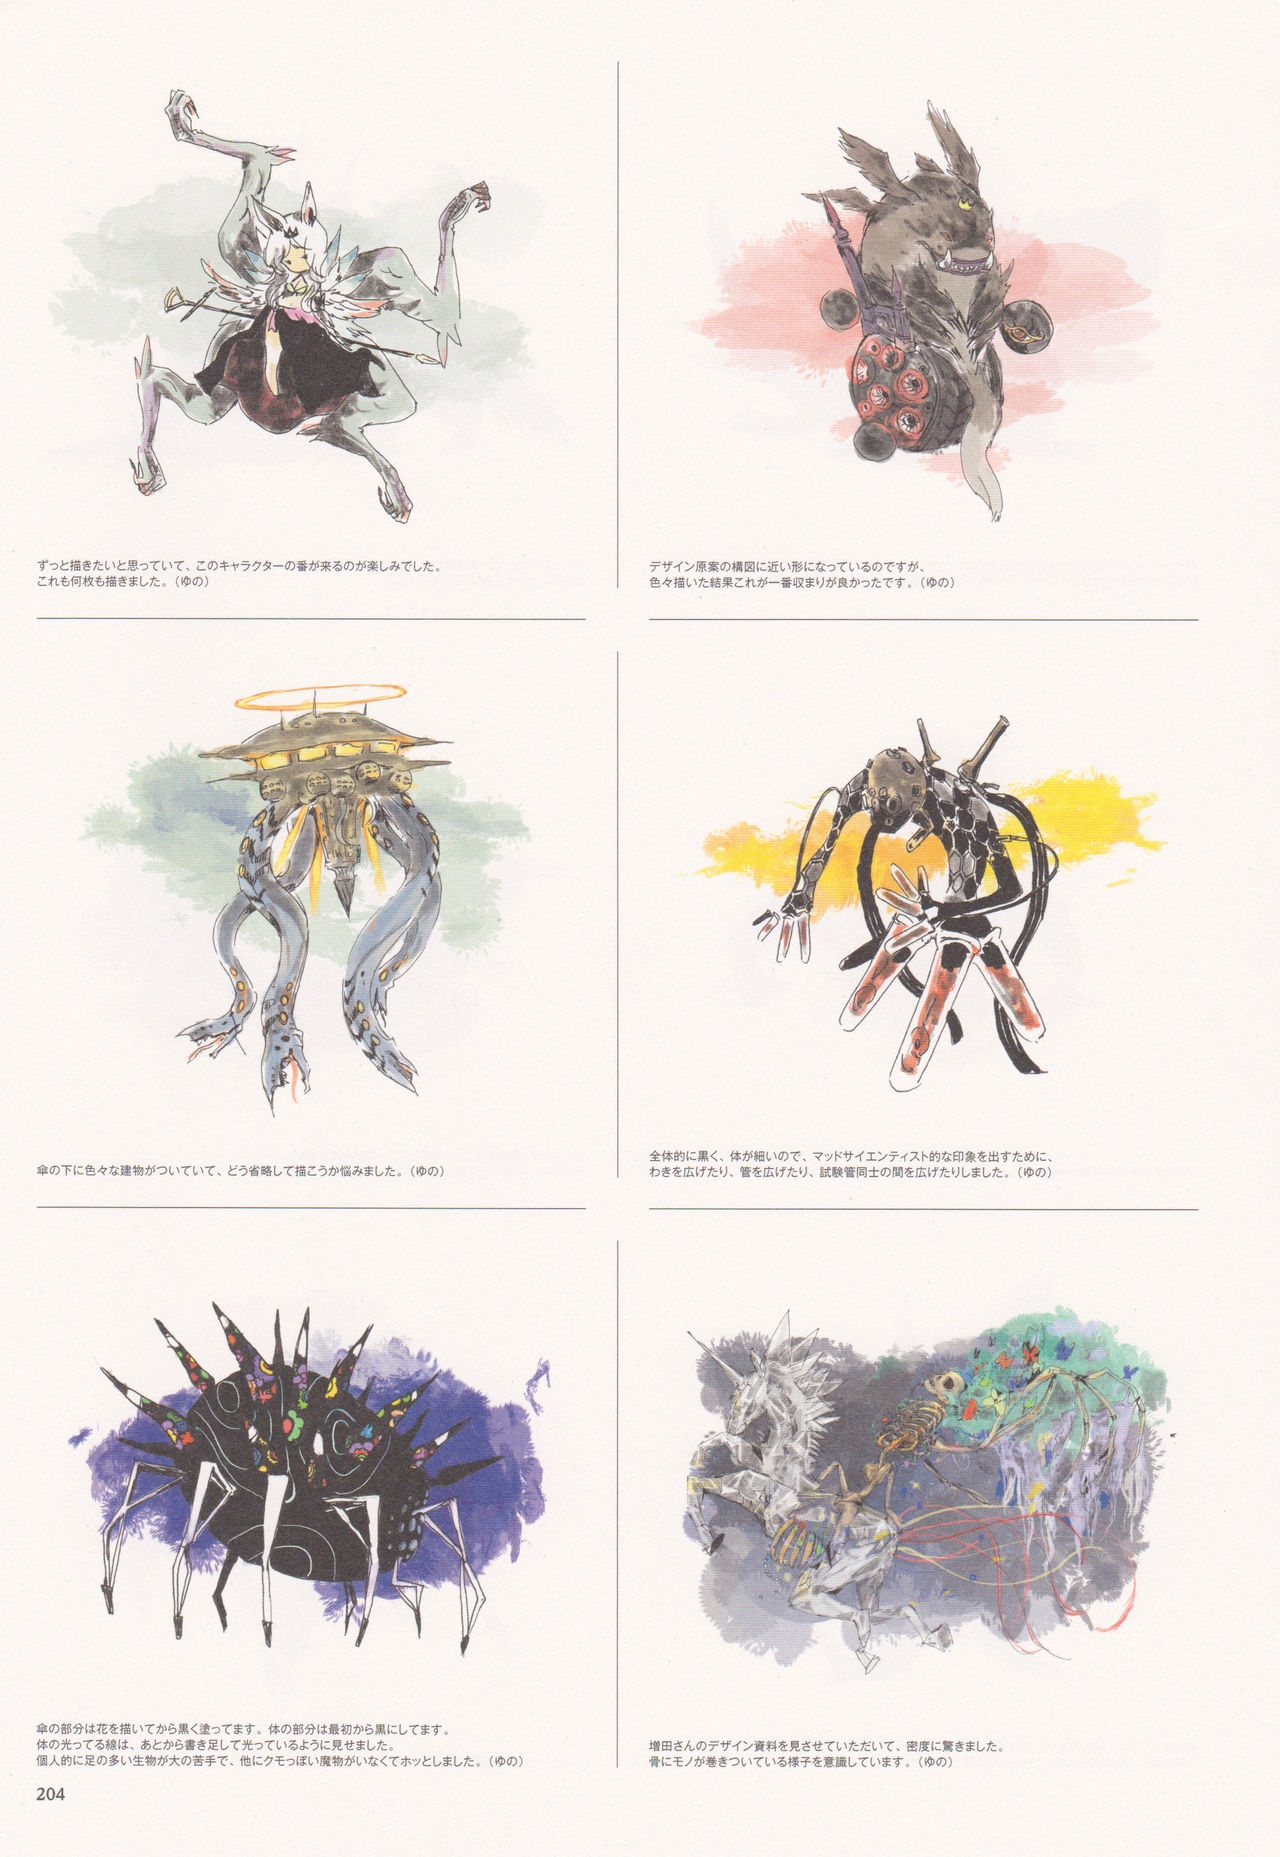 Bravely Second - End Layer - Design Works THE ART OF BRAVELY 2013-2015 204